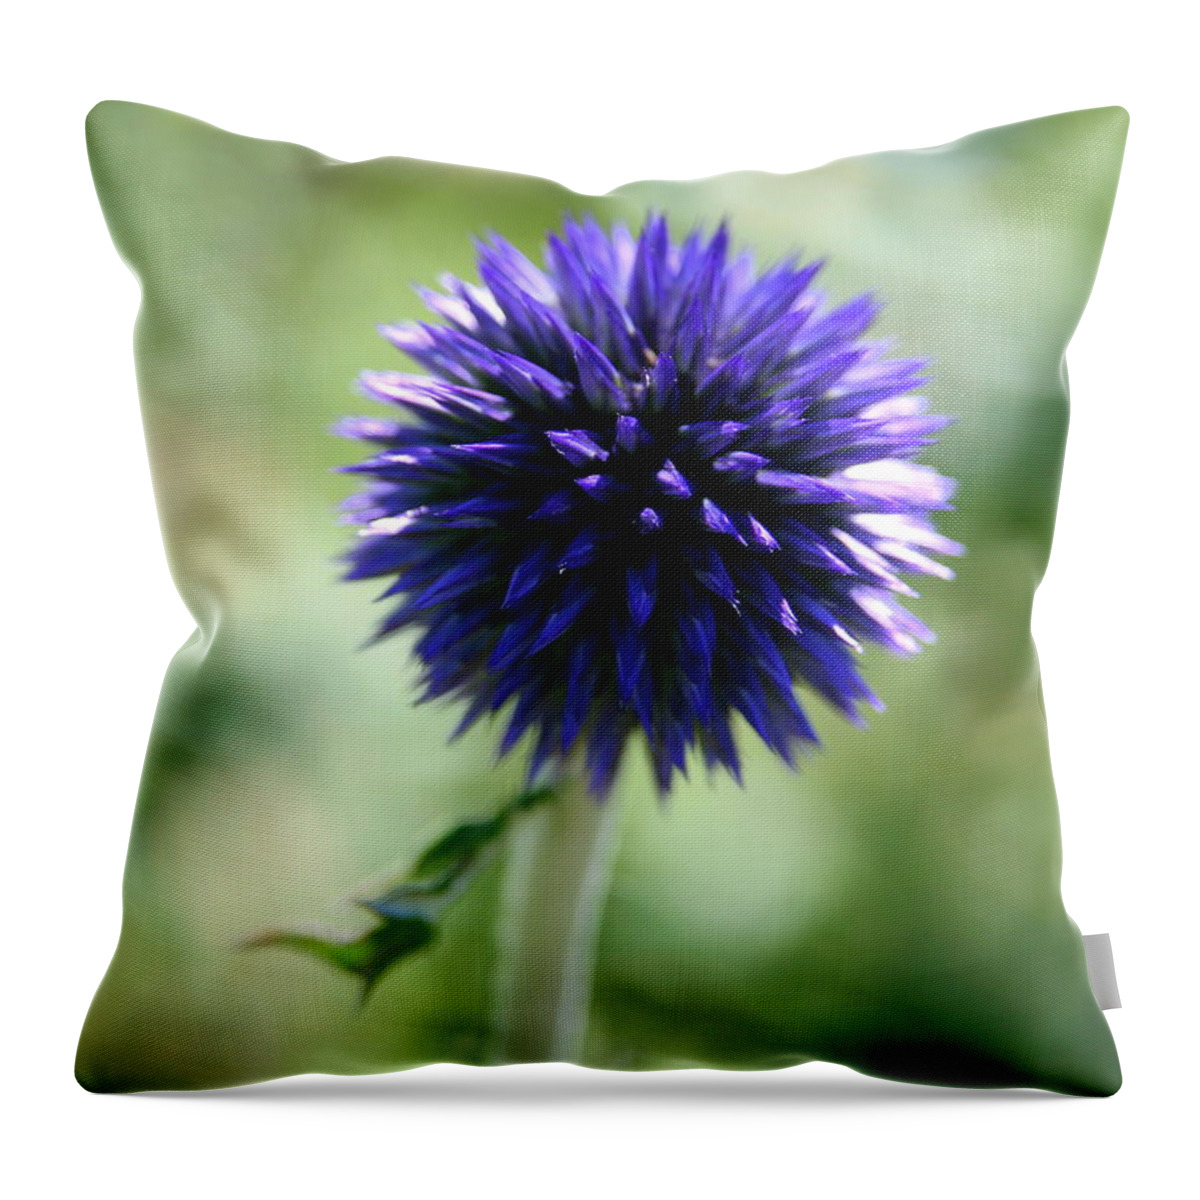 Globe Flower Throw Pillow featuring the photograph Globe Flower by Neal Eslinger